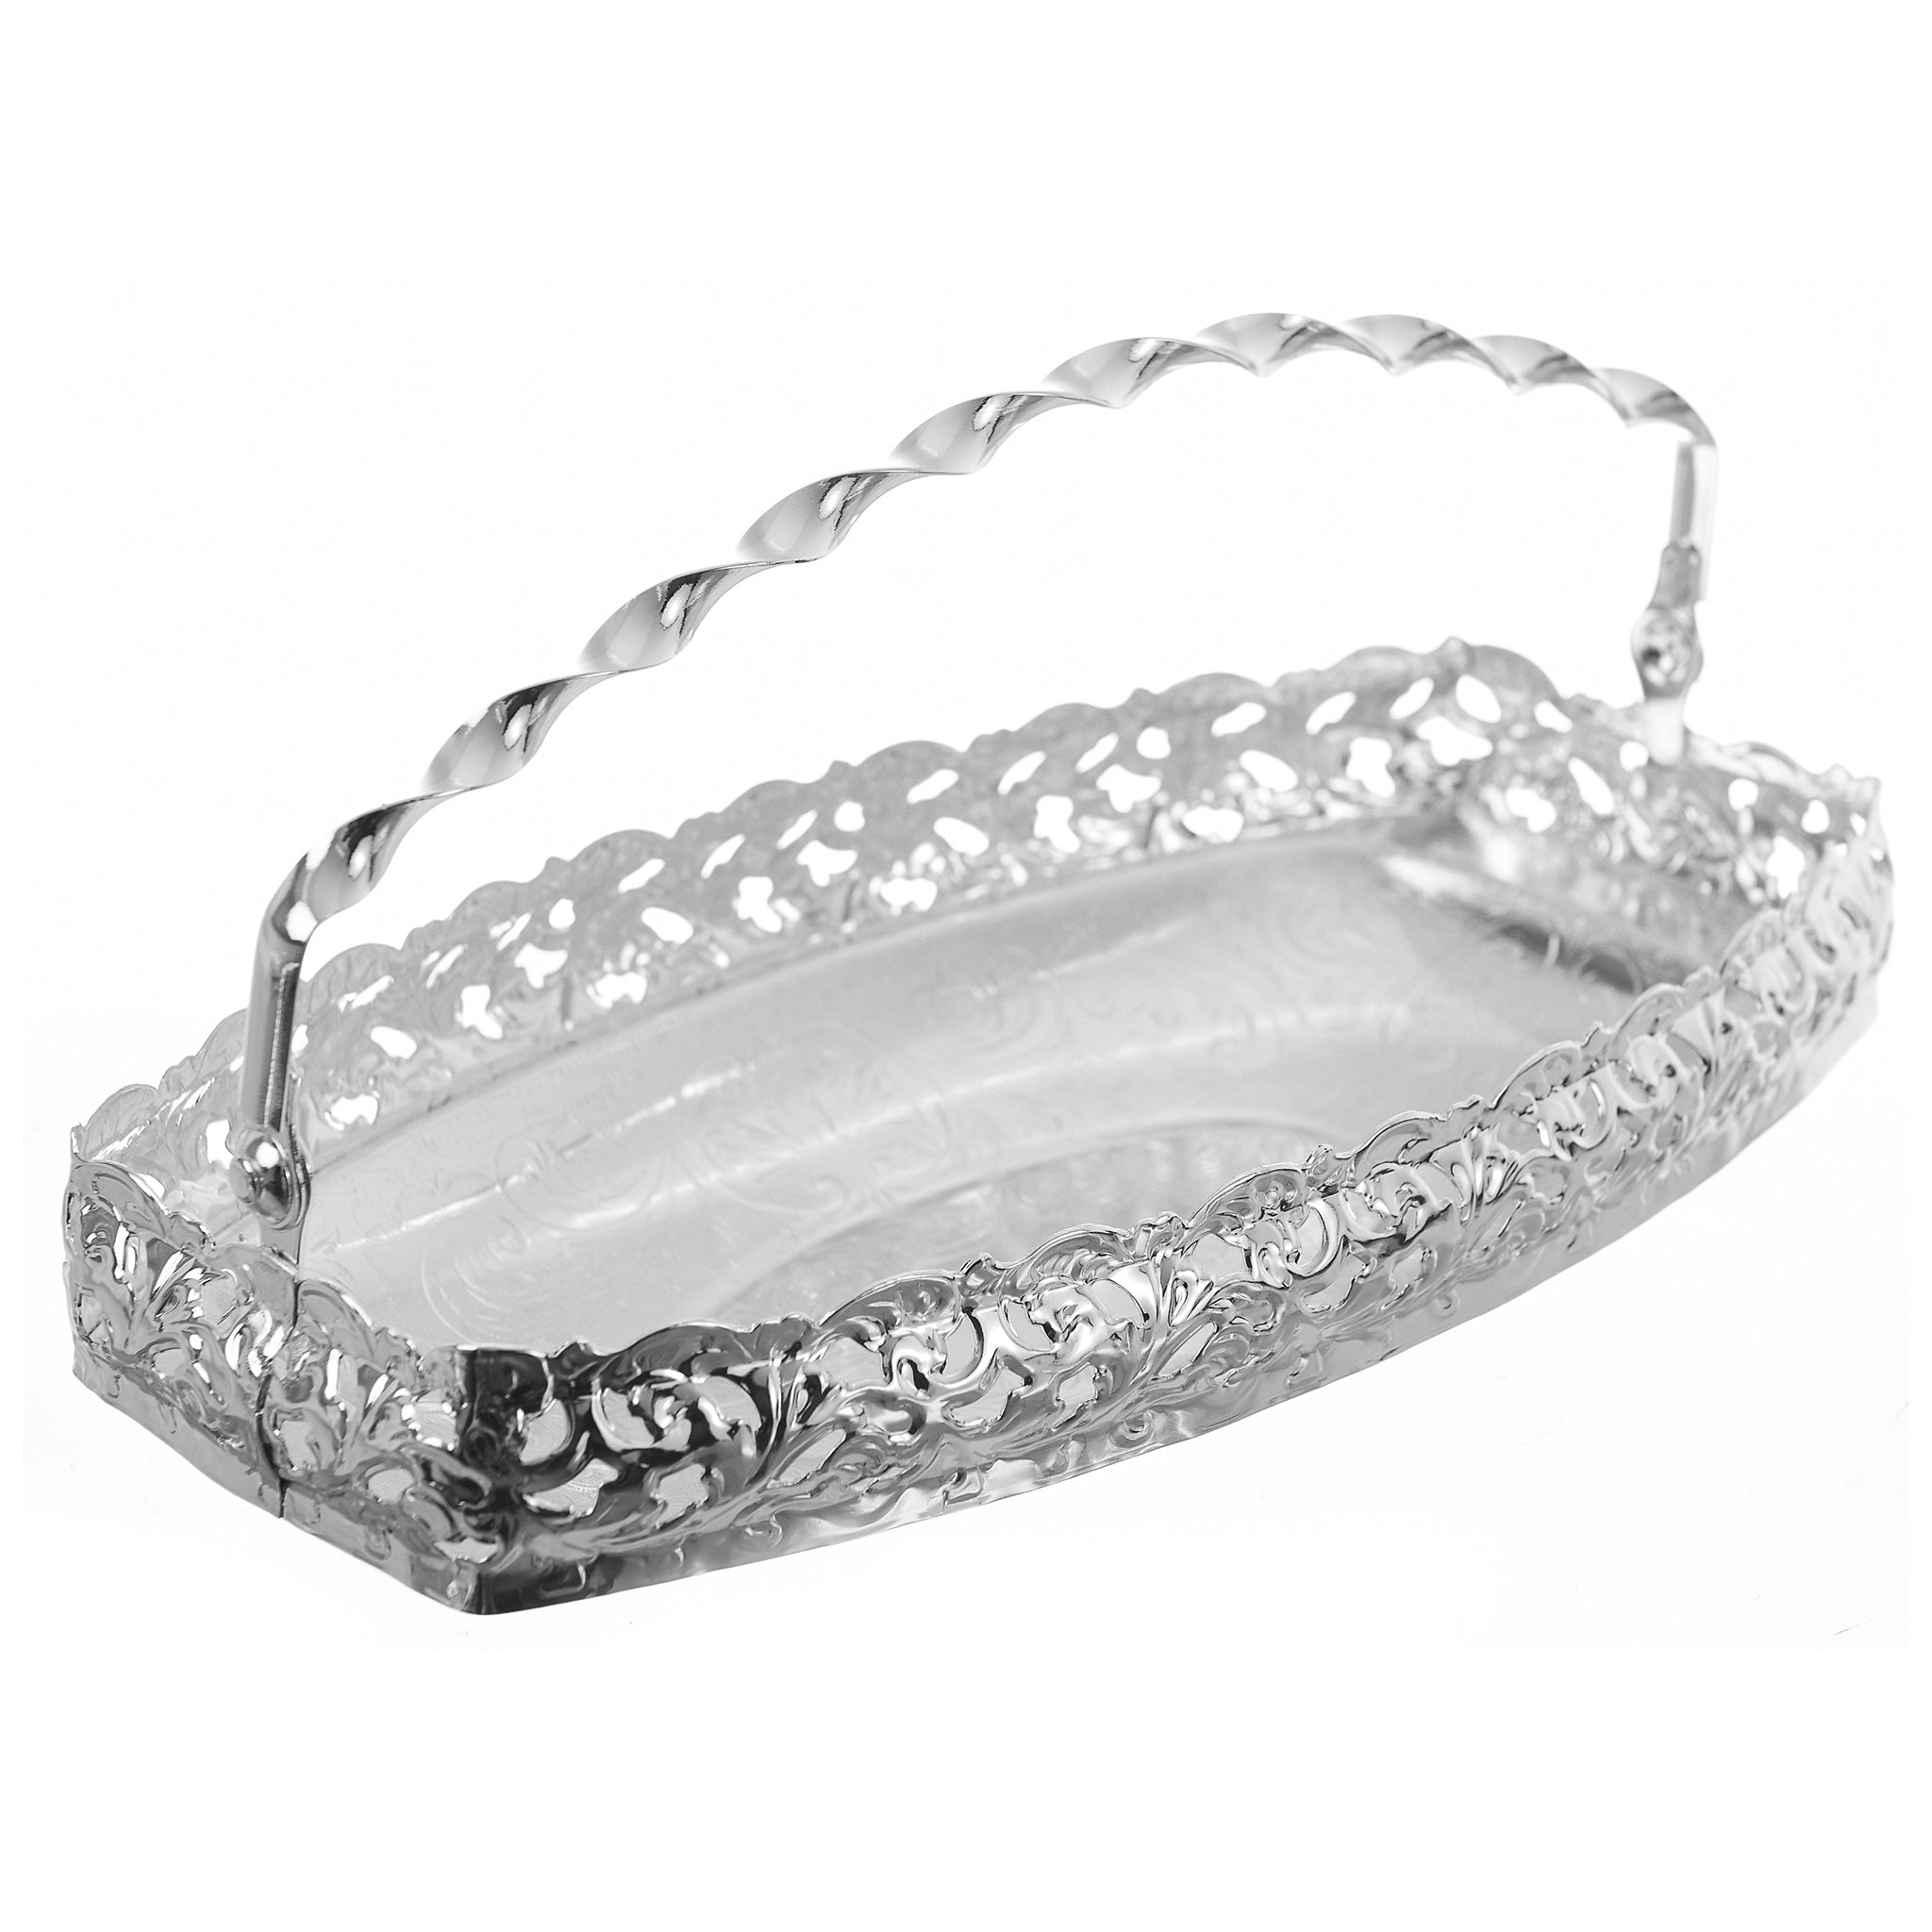 Queen Anne - Sweets Tray With Swing Handle - Silver Plated Metal - 24x13cm - 26000406